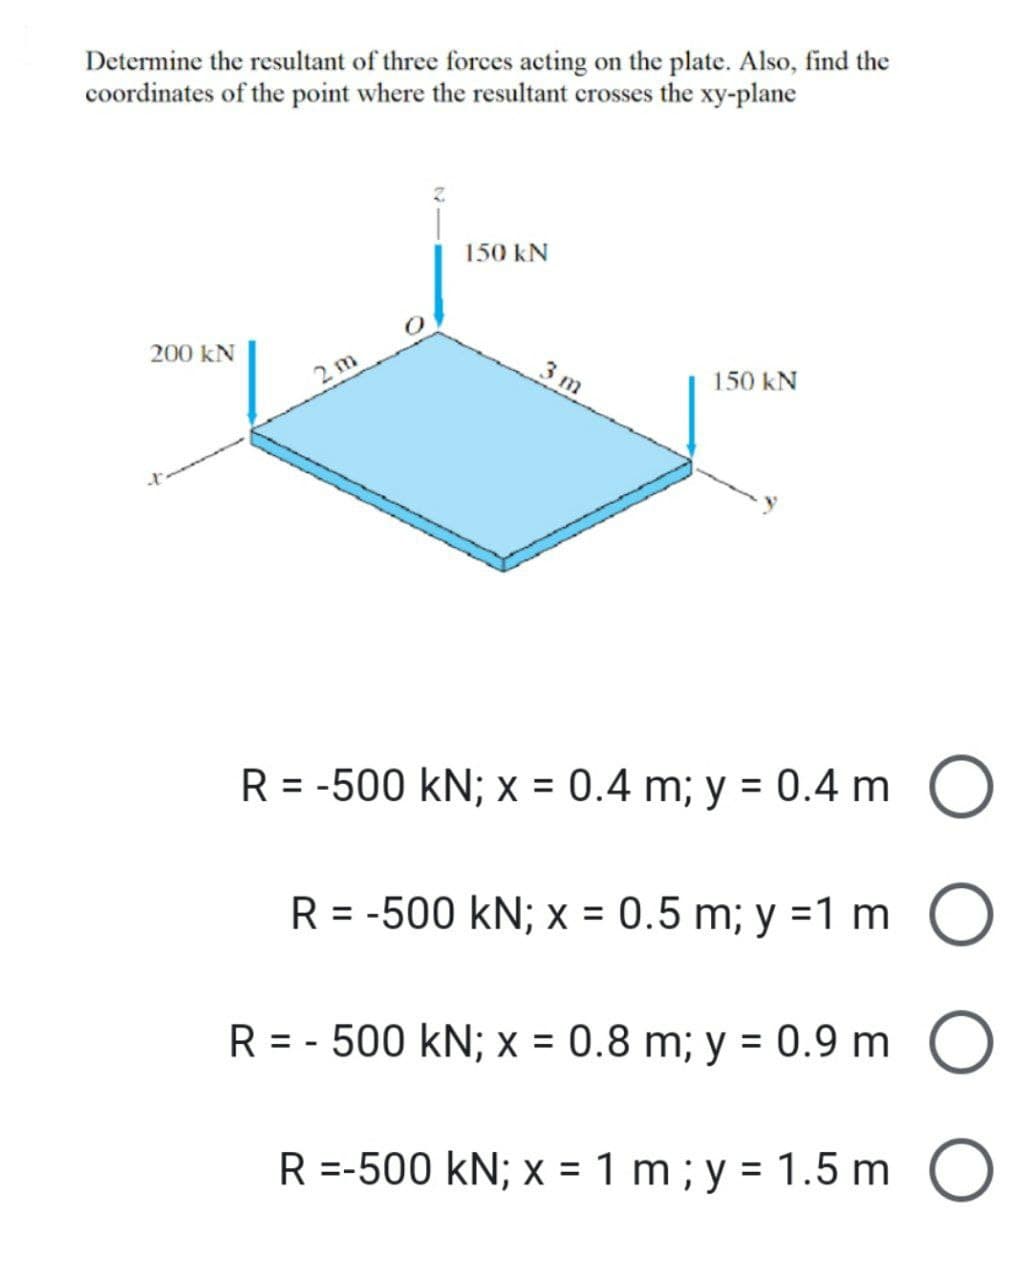 Determine the resultant of three forces acting on the plate. Also, find the
coordinates of the point where the resultant crosses the xy-plane
150 kN
200 KN
2m
150 kN
R = -500 kN; x = 0.4 m; y = 0.4 m
R = -500 kN; x = 0.5 m; y = 1 m
R = 500 kN; x = 0.8 m; y = 0.9 m
-
R =-500 kN; x = 1 m; y = 1.5 m
3m
O